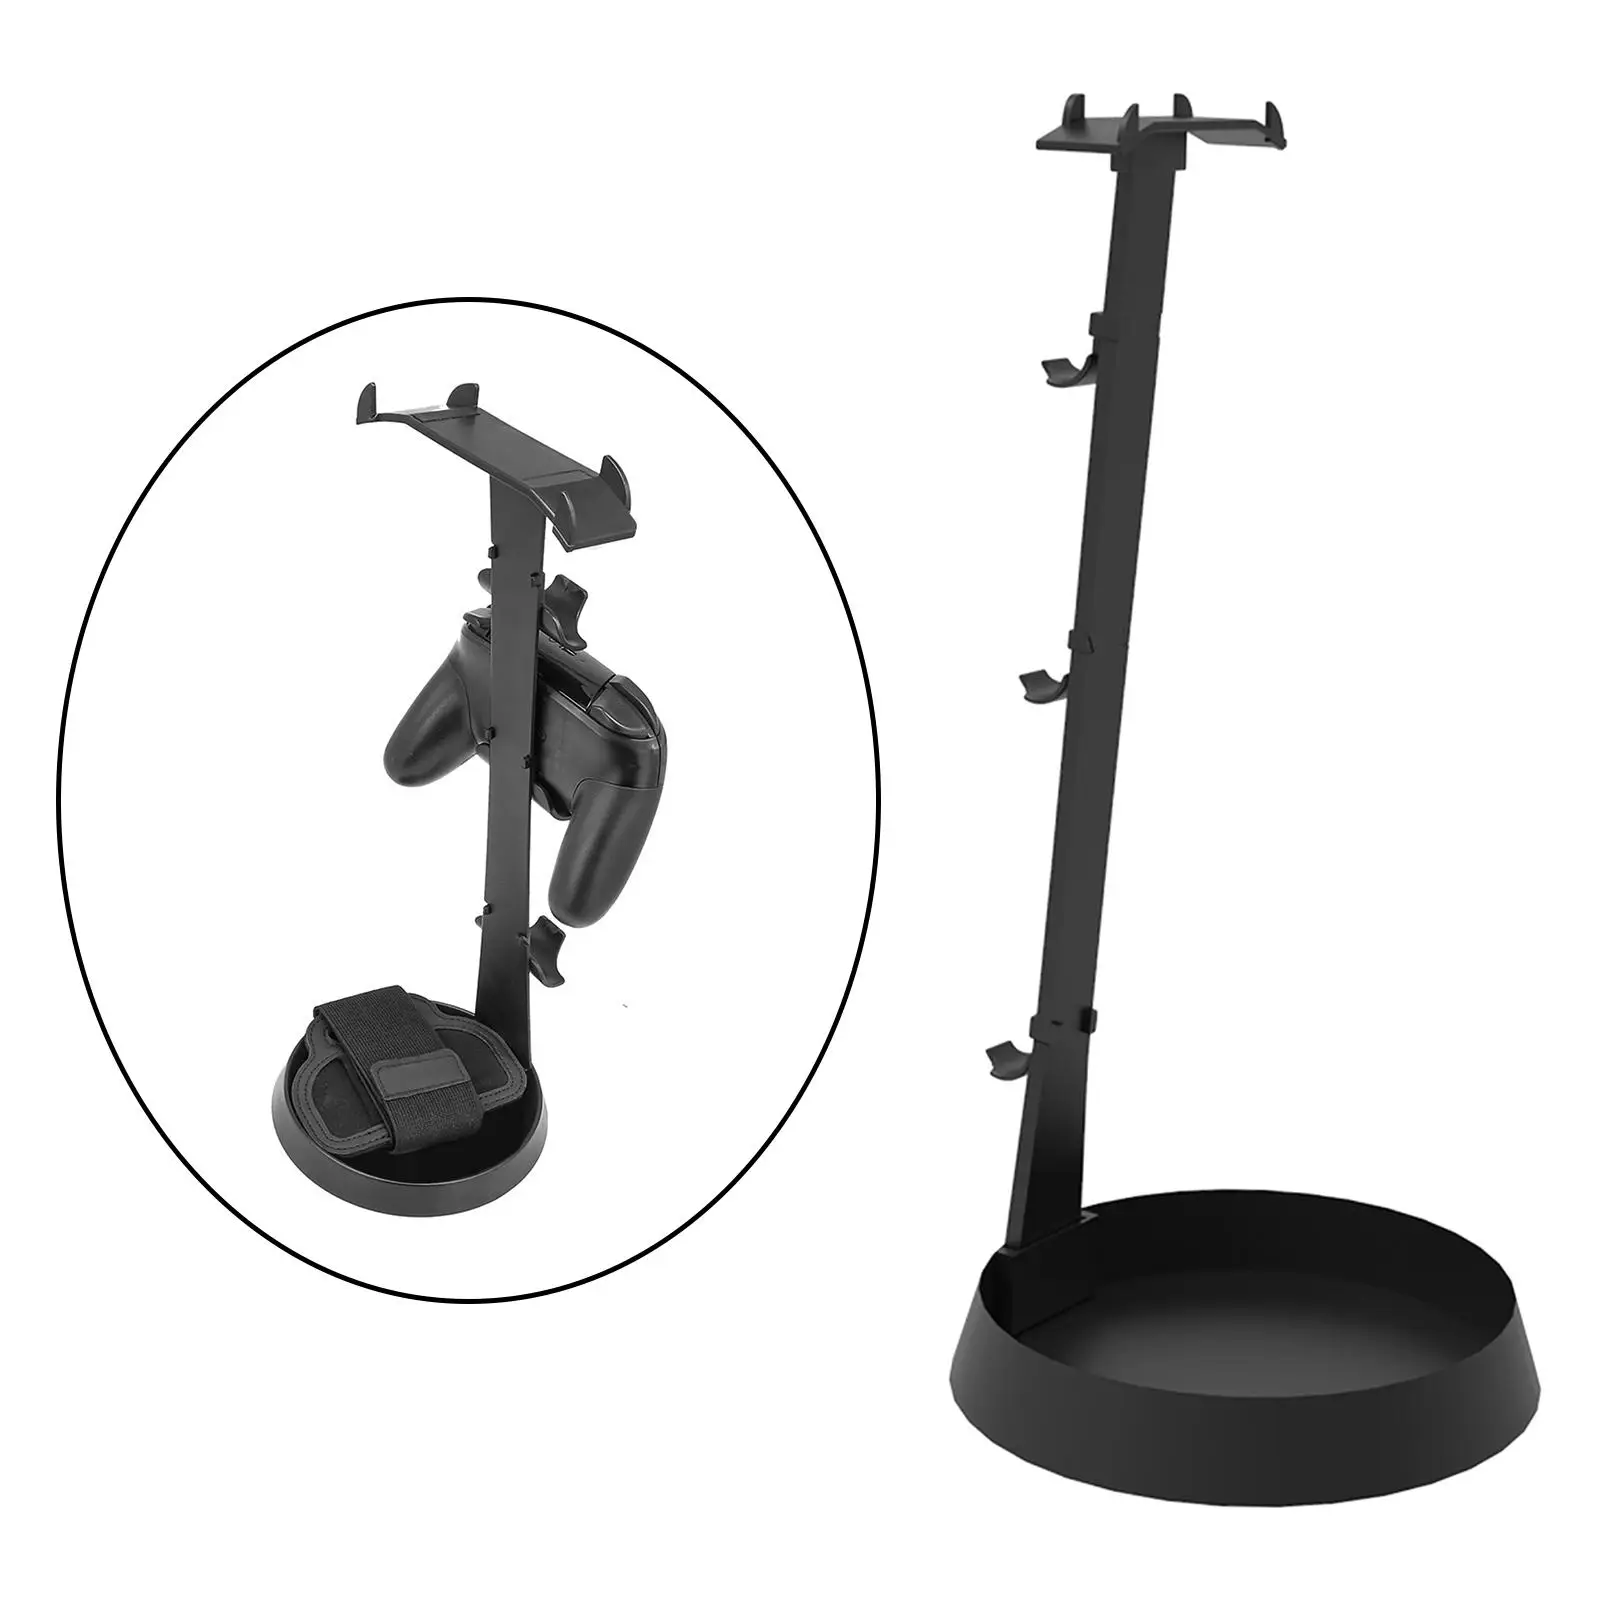  Game Controller Stand Holder, Stable Tray Base Display Stand Bracket Organizer  Game Cards Accessories Gamer Gifts